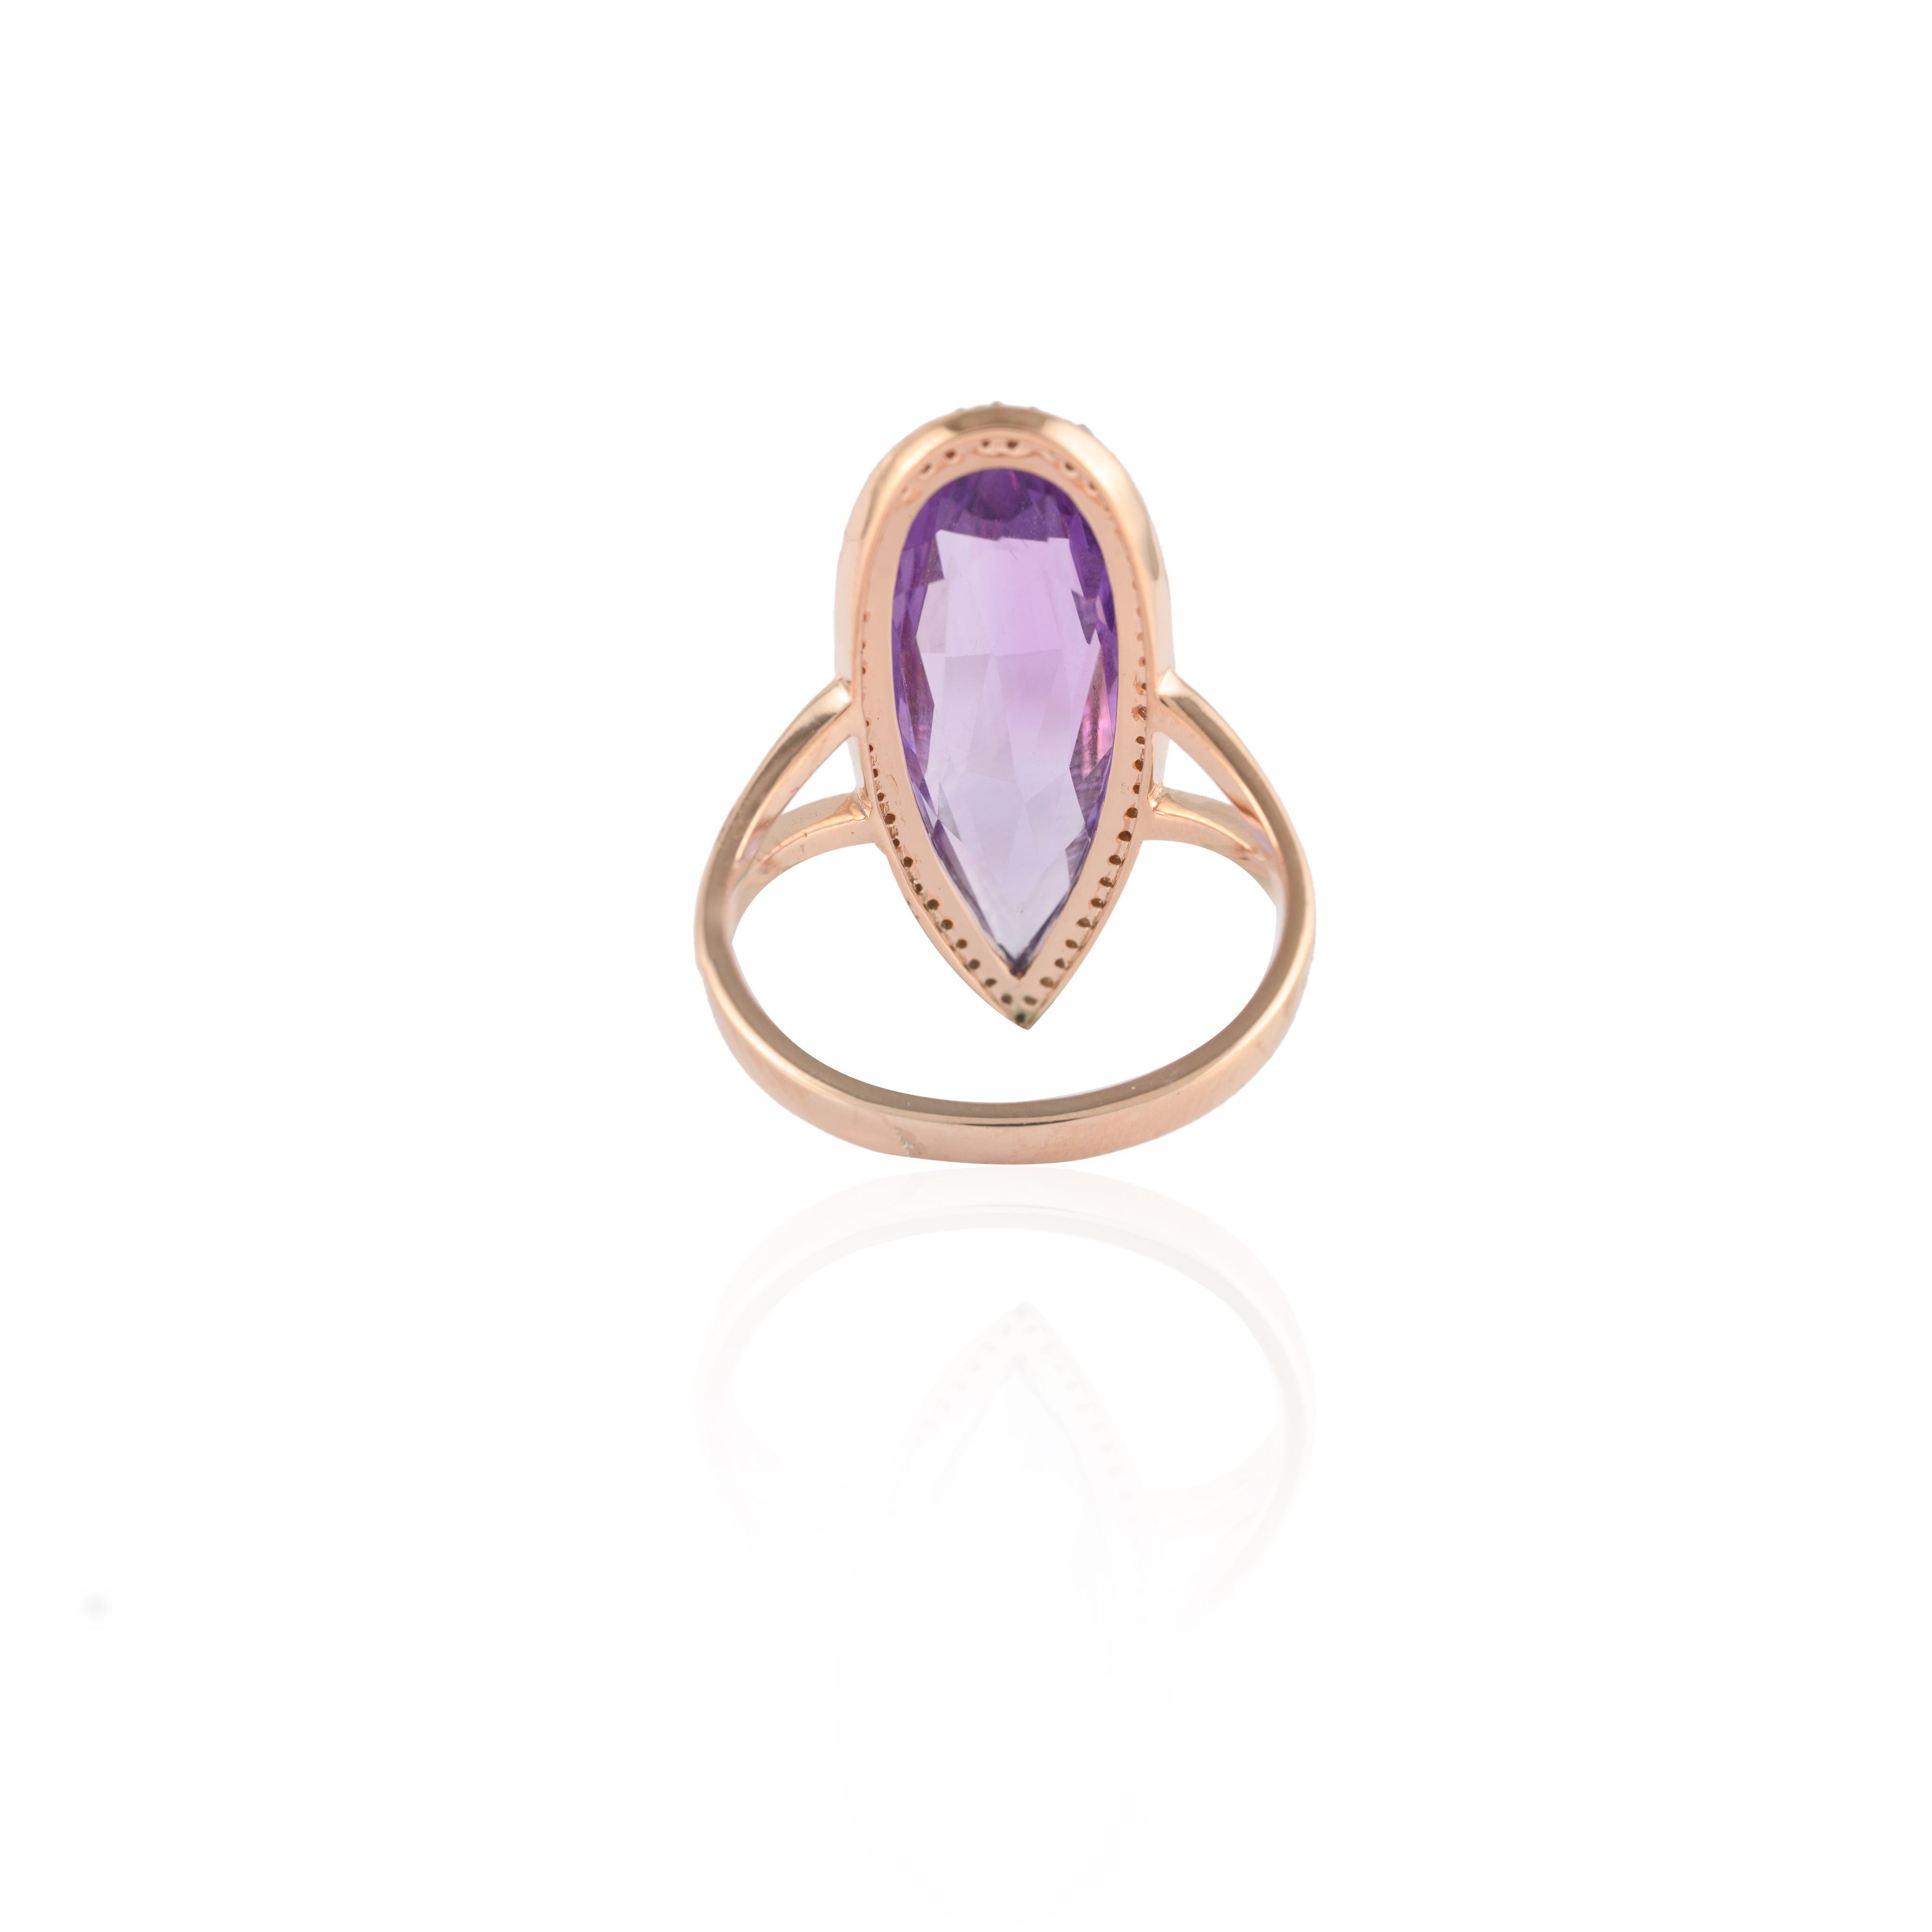 For Sale:  Crystal Clear Statement Amethyst Ring in 14k Rose Gold Settings & Halo Diamonds 7